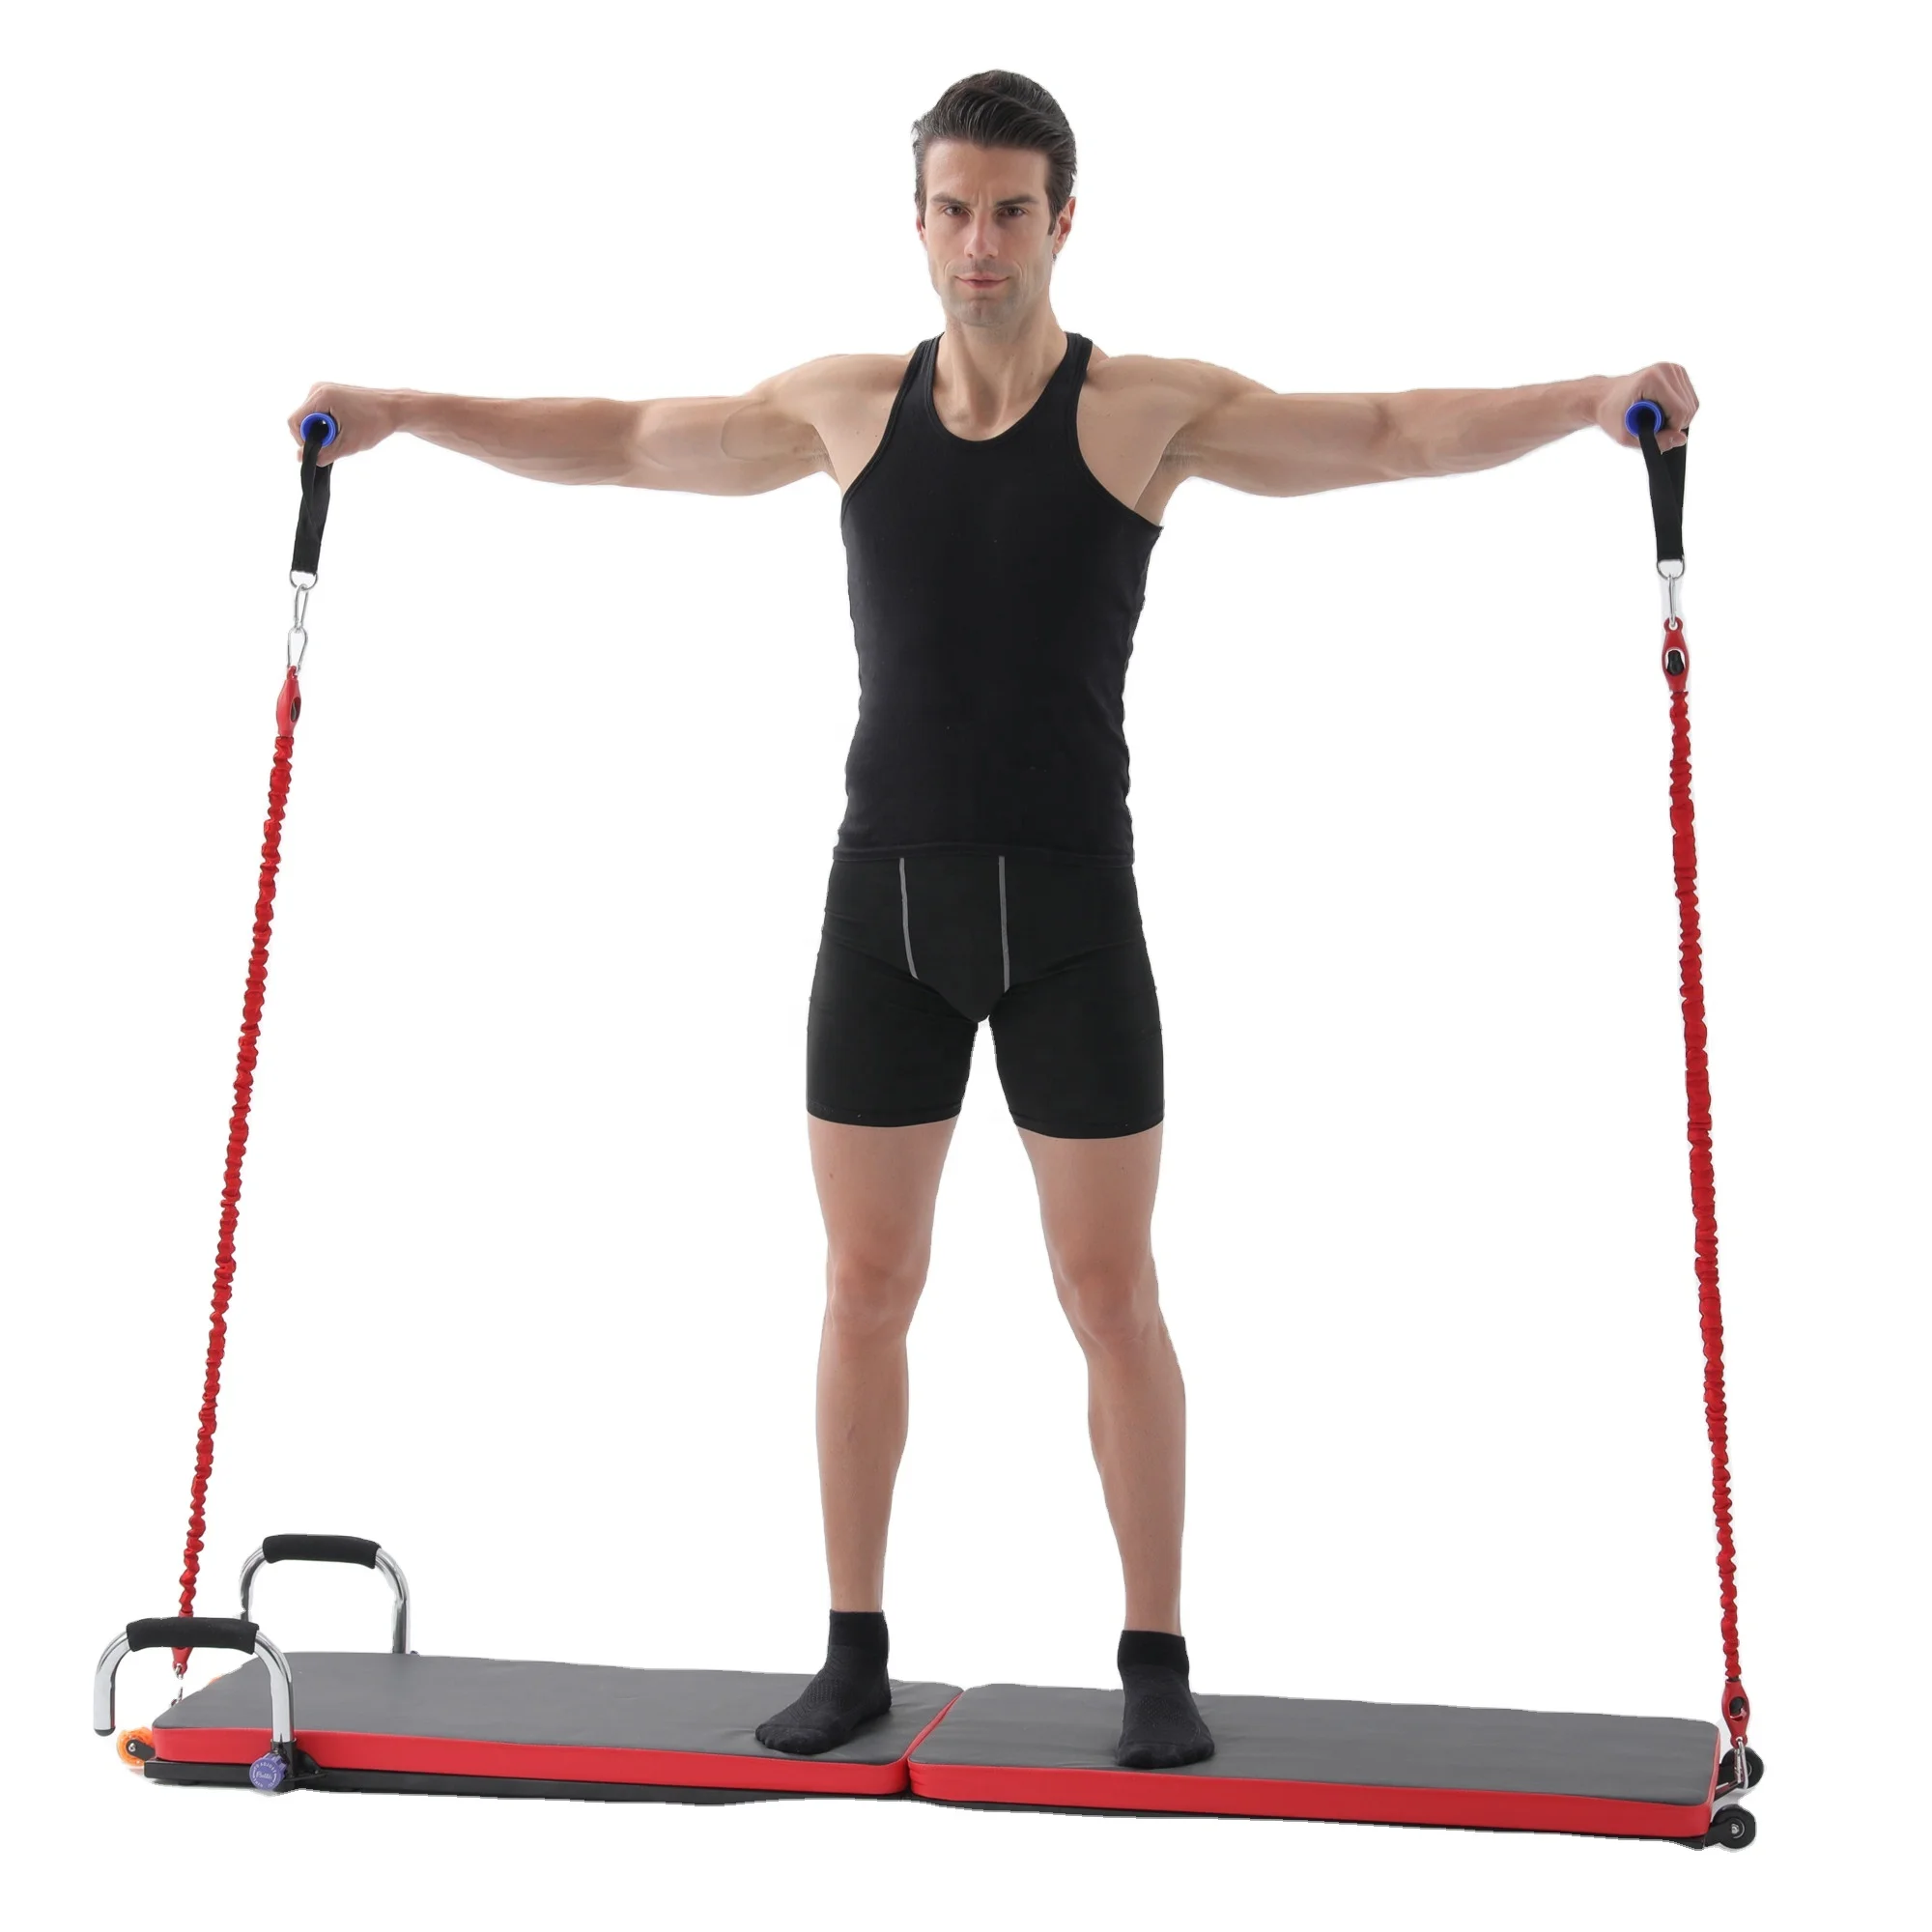 Hot sale Amazon home gym equipment Multi-functional fitness board with resistance bands